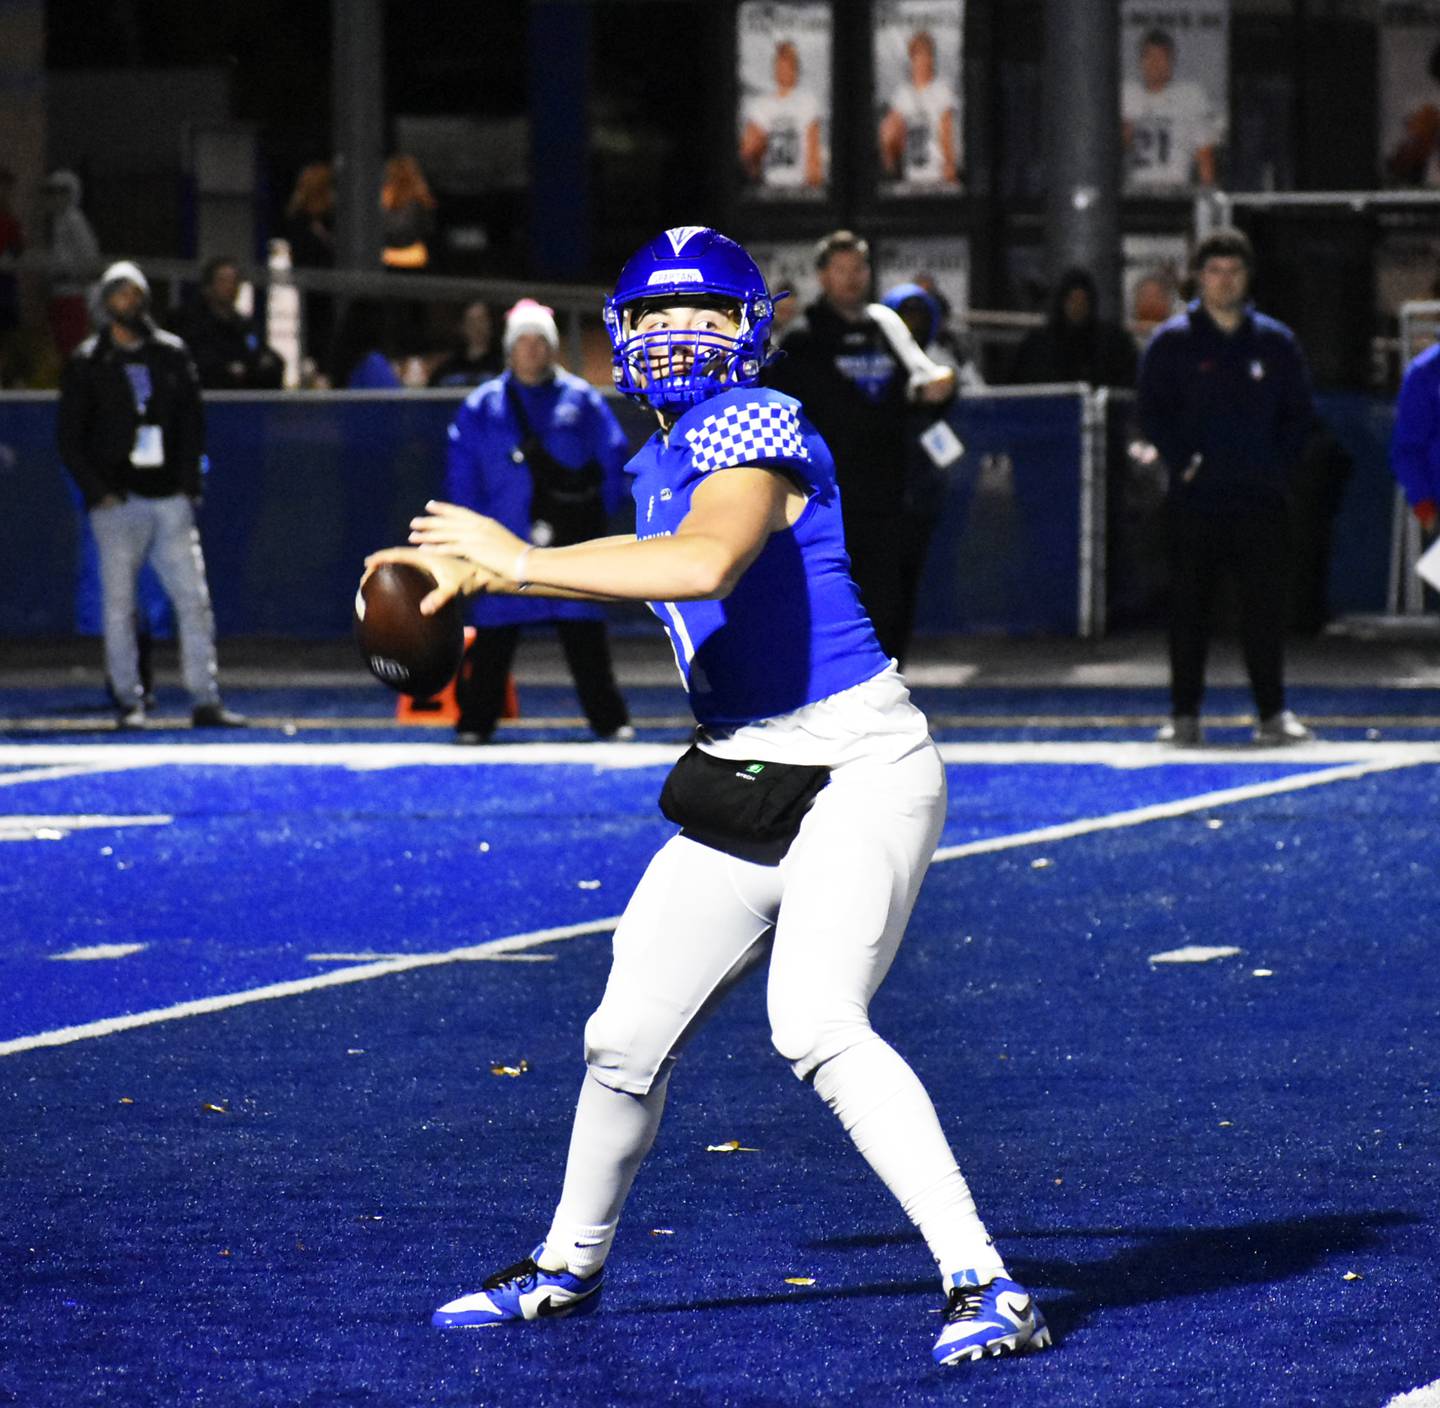 Quarterback Alessio Milivojevic threw for 296 yards and five touchdowns as Wheaton St. Francis defeated Rochelle 45-14 in the first round of the IHSA Class 5A playoffs on Friday.